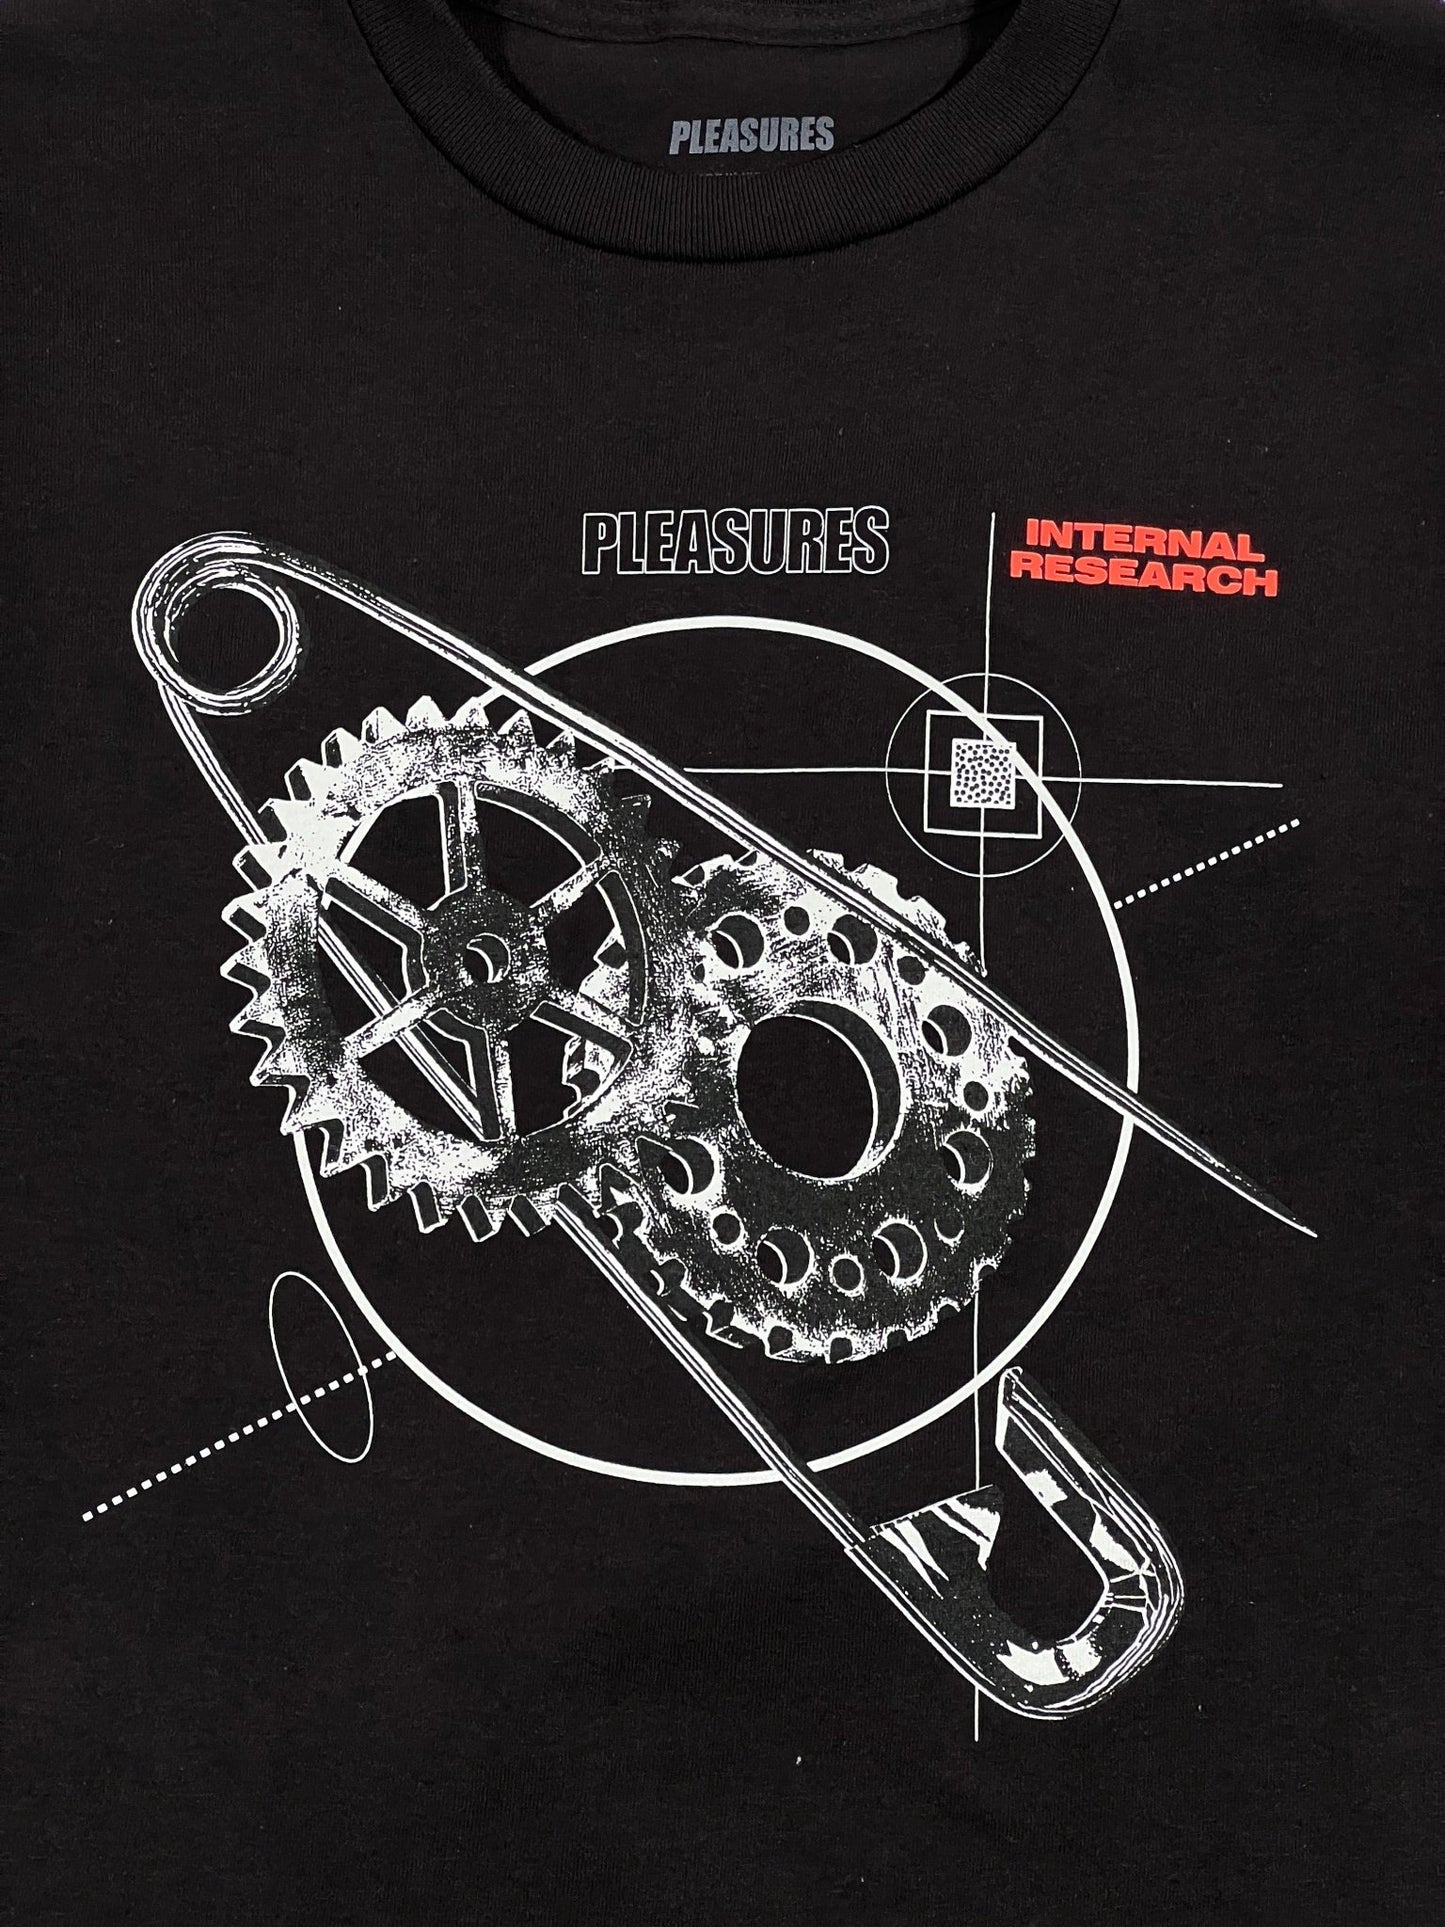 A black cotton fabric RESEARCH T-SHIRT BLACK/BLACK with a graphic design of a gear by PLEASURES.